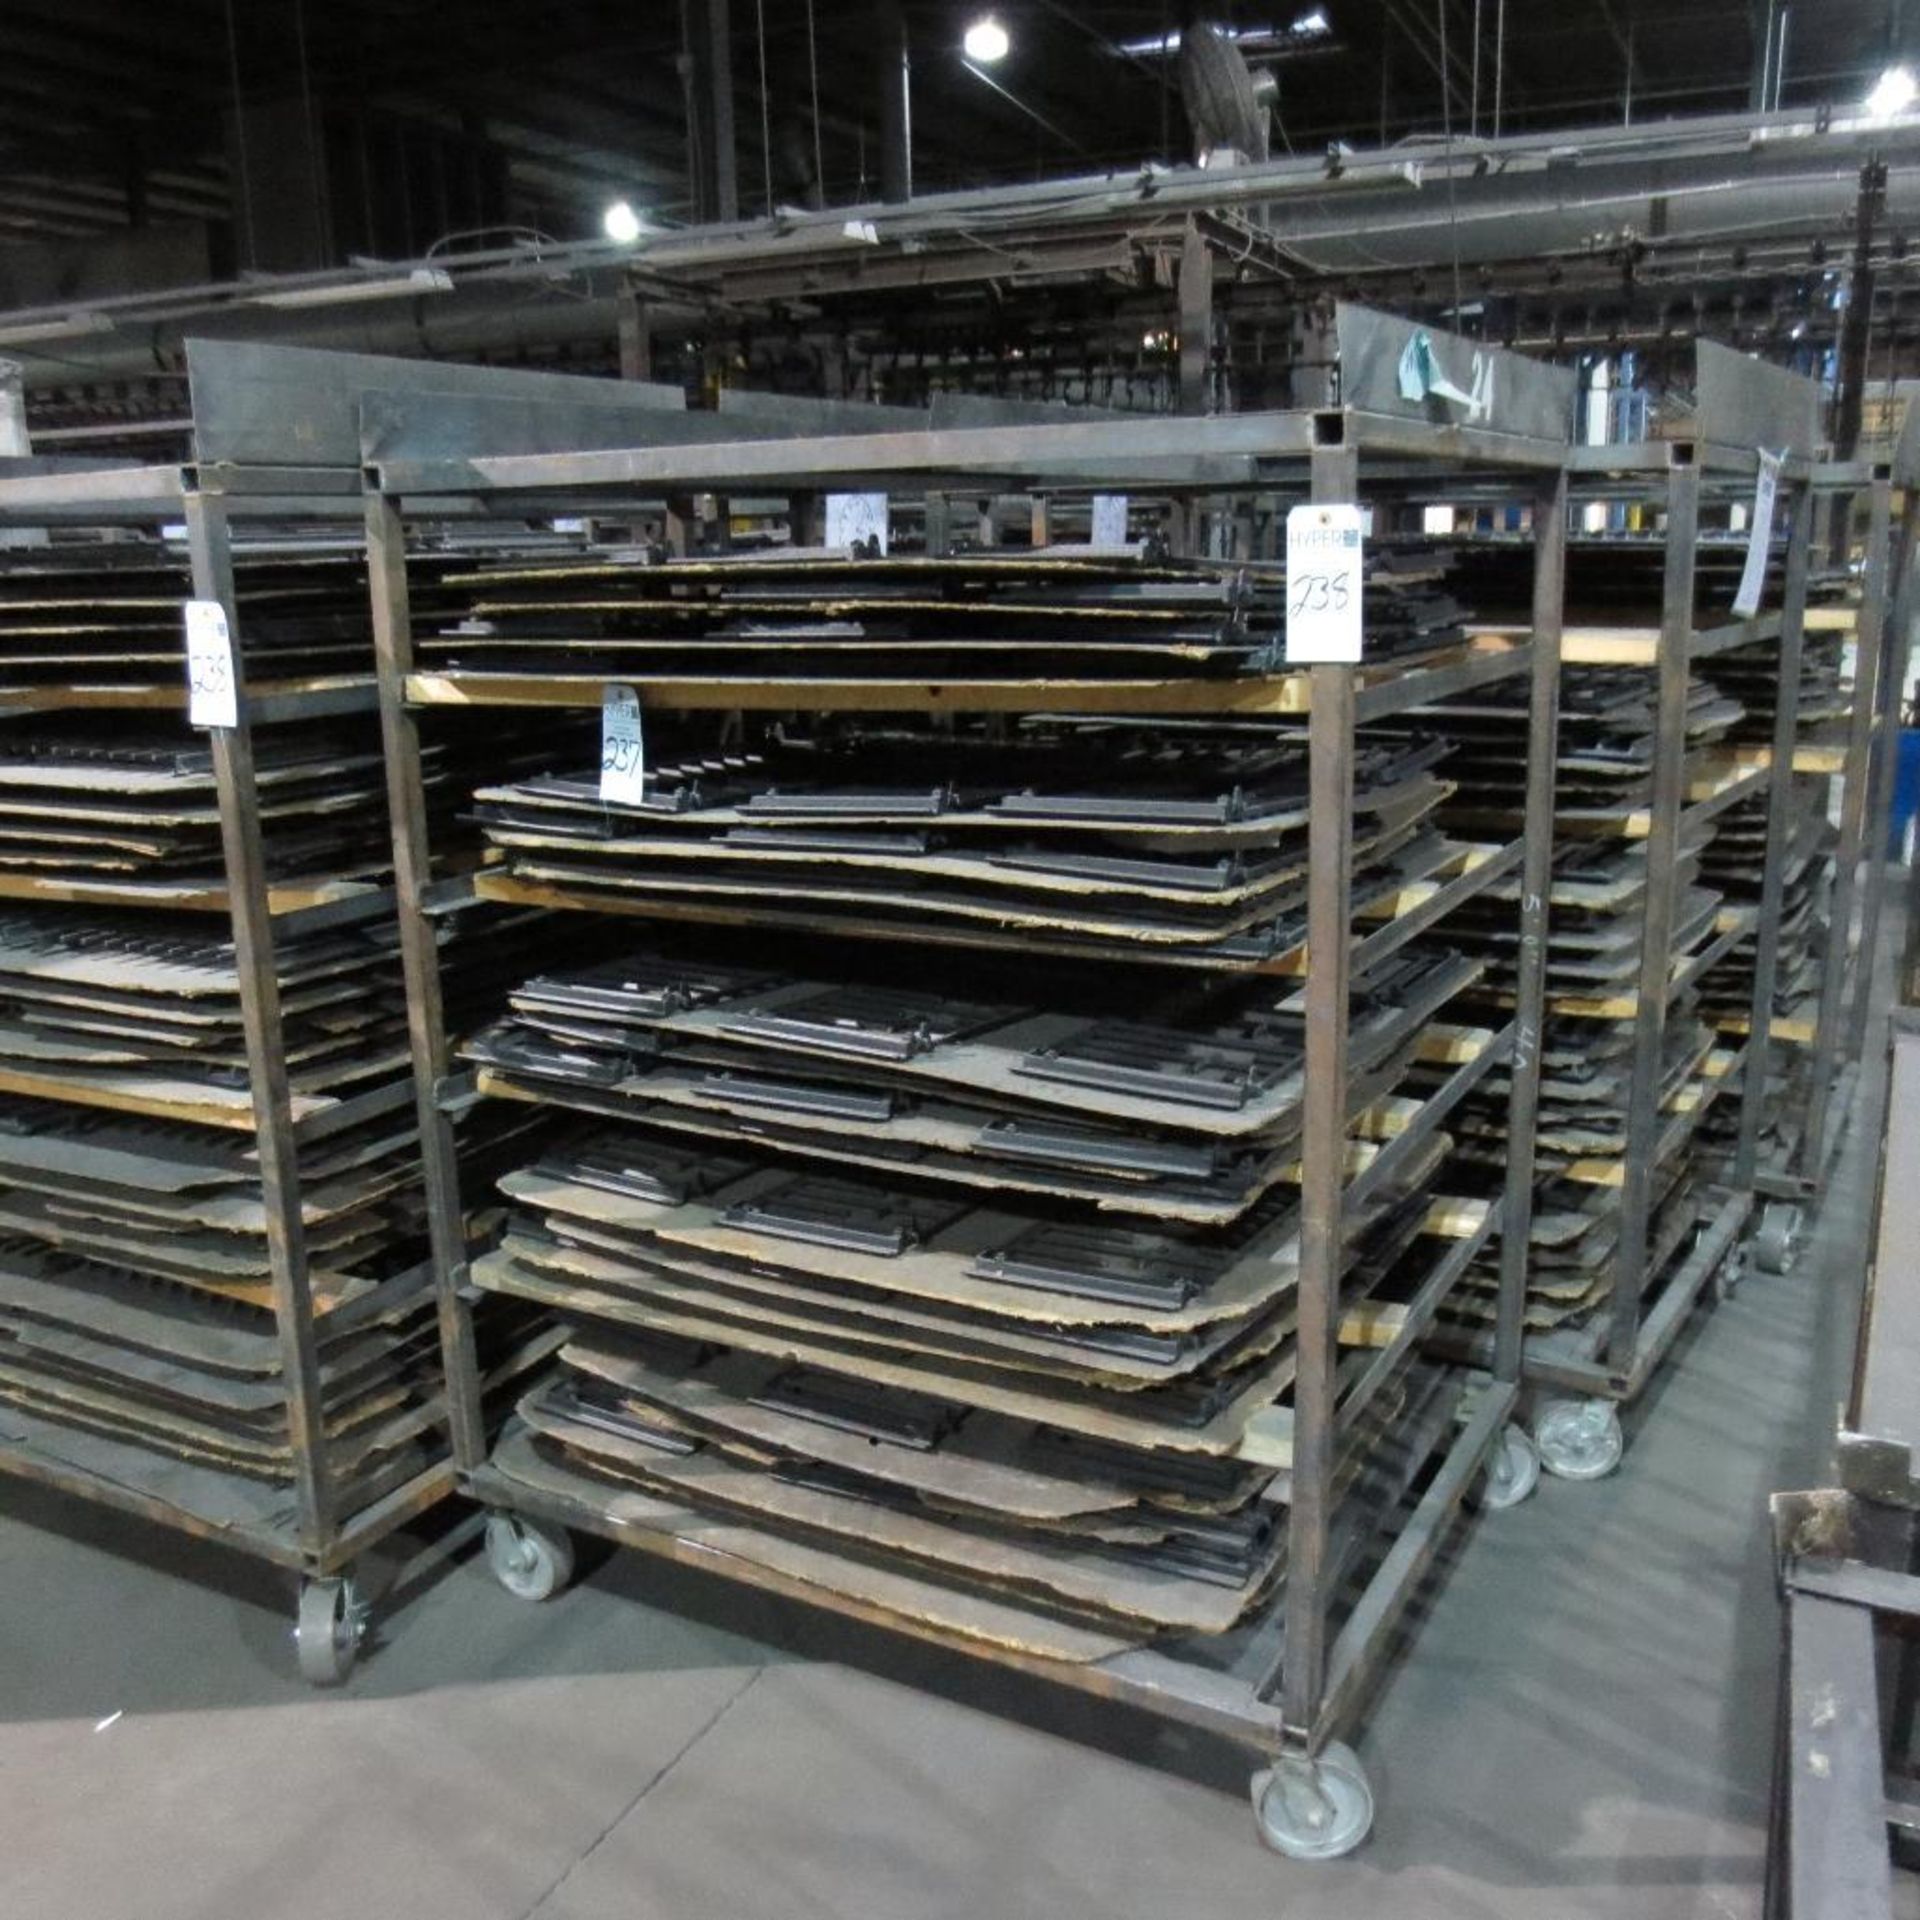 (Est) 12 Rack Carts ( No items on Carts going with lot ) 1 week hold on lot from time of sale - Image 2 of 2